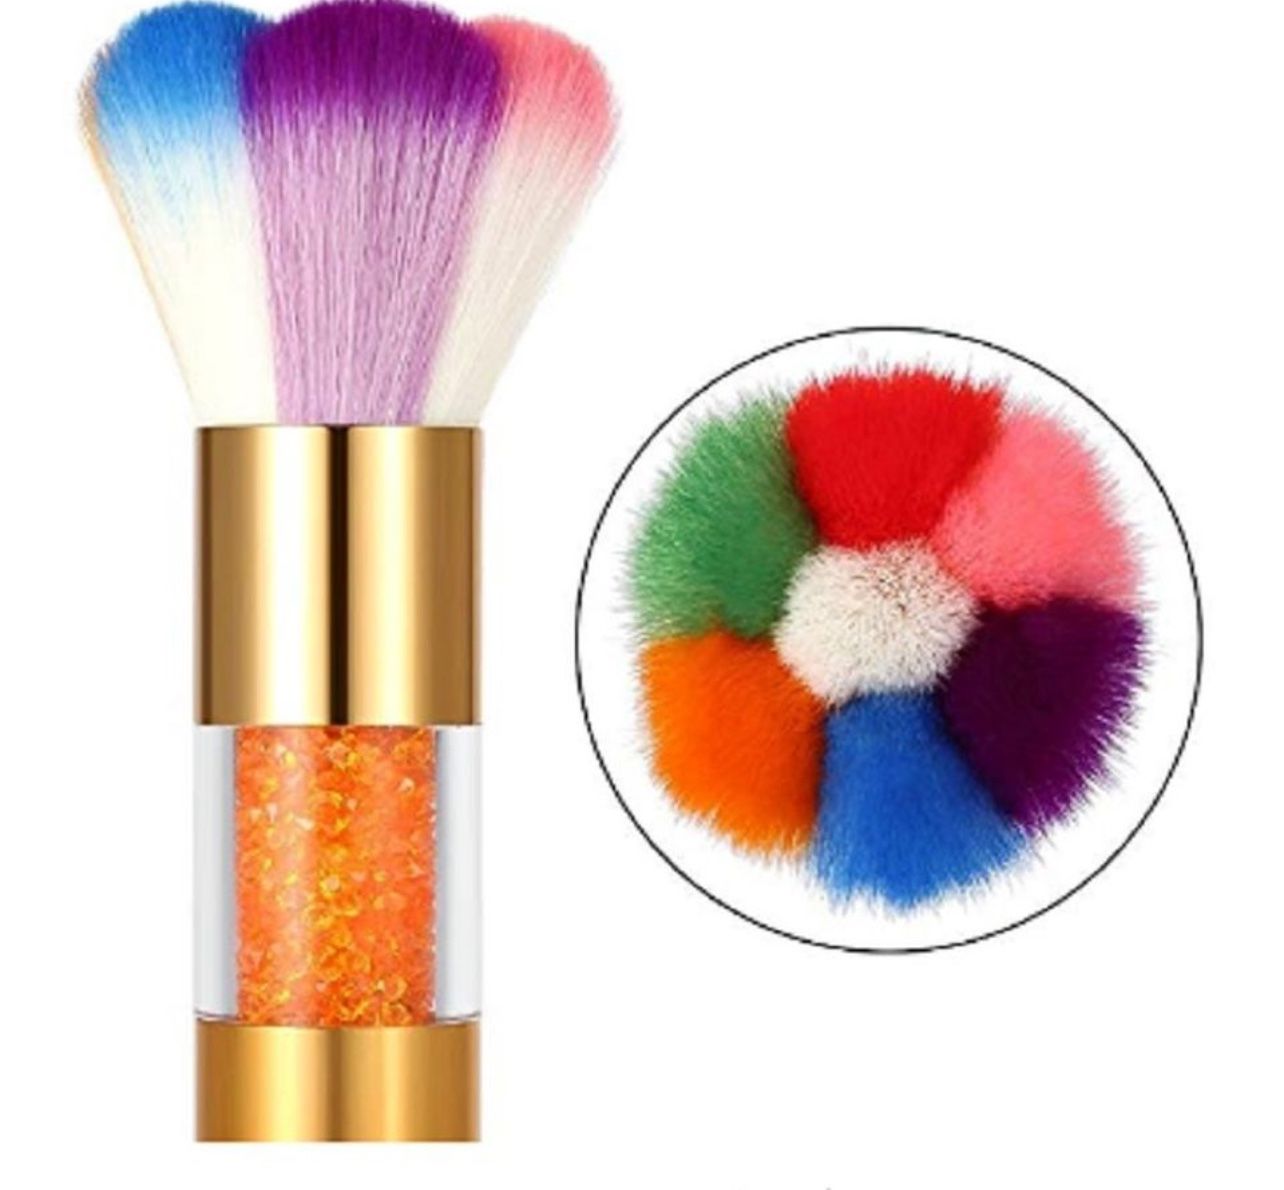 Nail Art Glitter Brush Makeup Dust Clean UV Gel Powder Remover Manicure Acrylic Gold